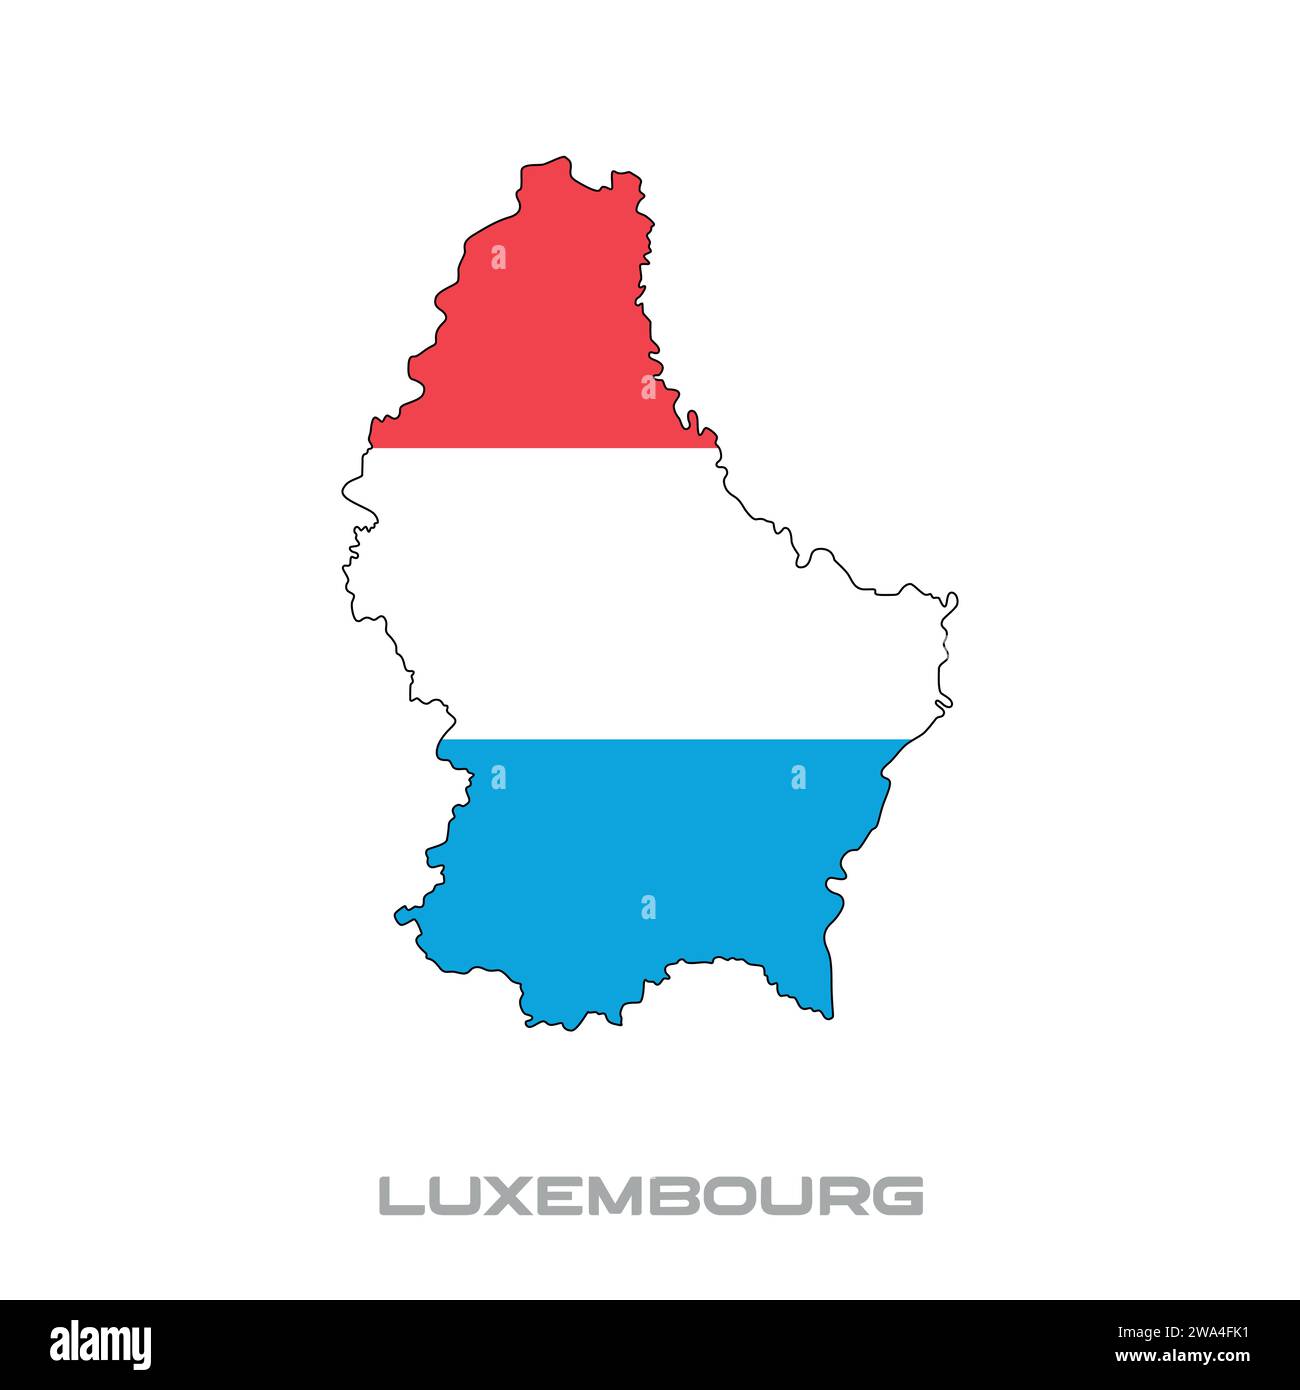 Vector illustration of the flag of Luxembourg with black contours on a white background Stock Vector